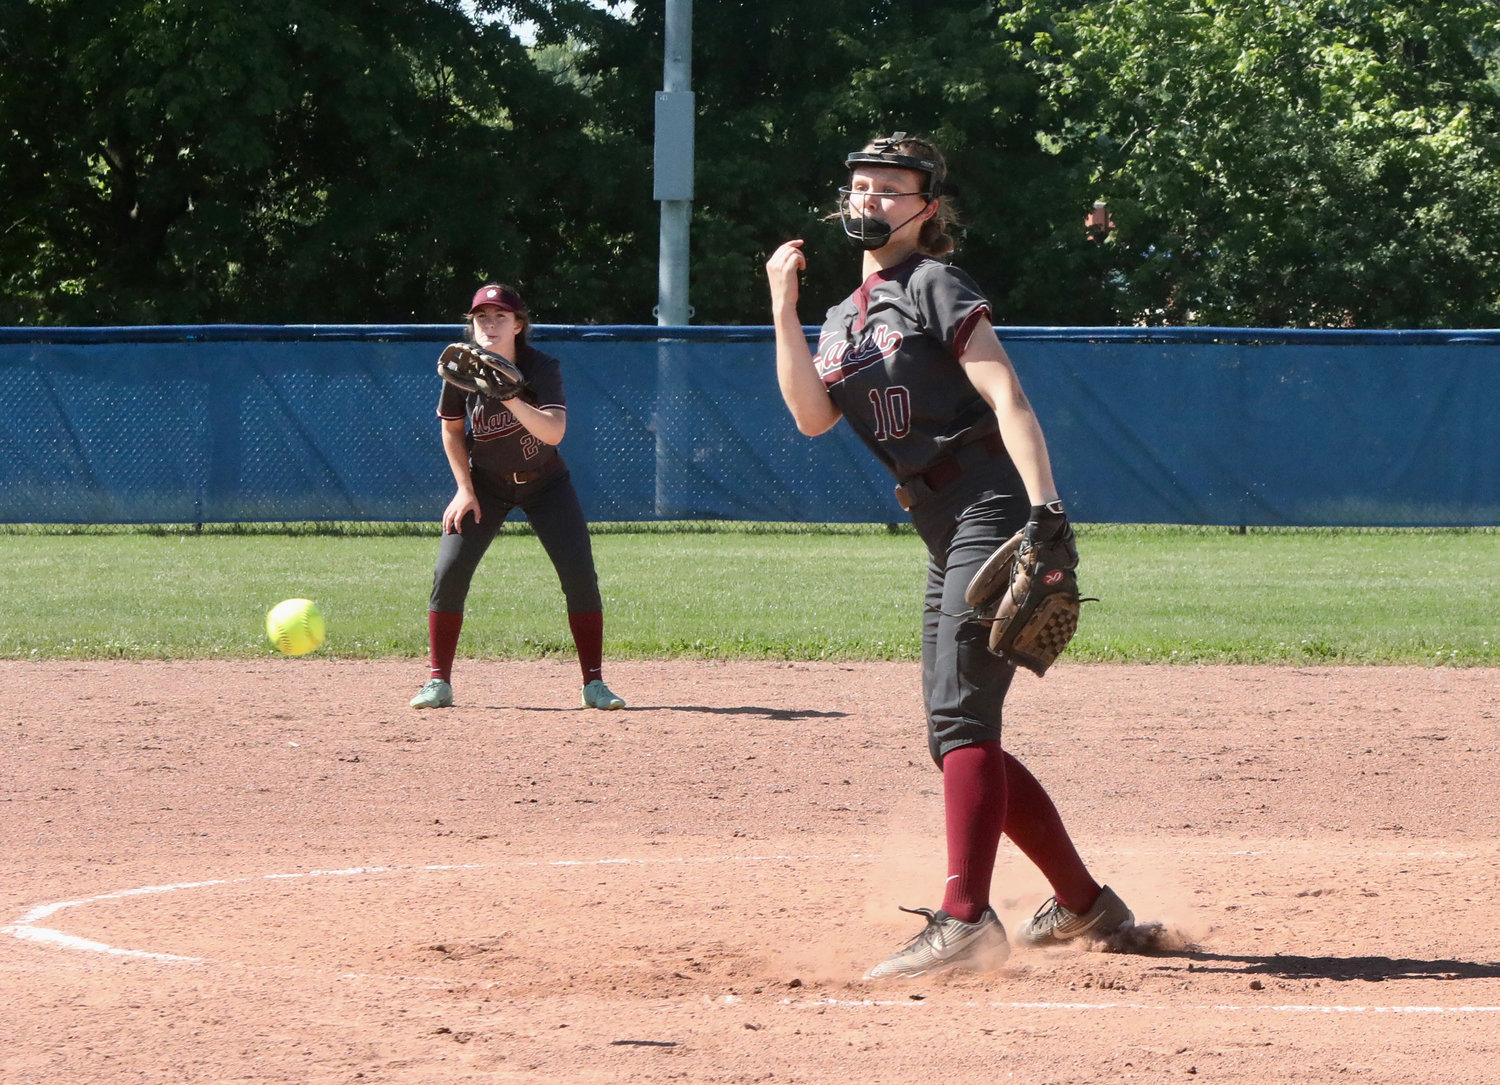 Livingston Manor’s Mackenzie Carlson pitched a good game, striking out 12 and allowing eight hits. Four Manor errors complicated matters, as did Eldred’s lively bats.